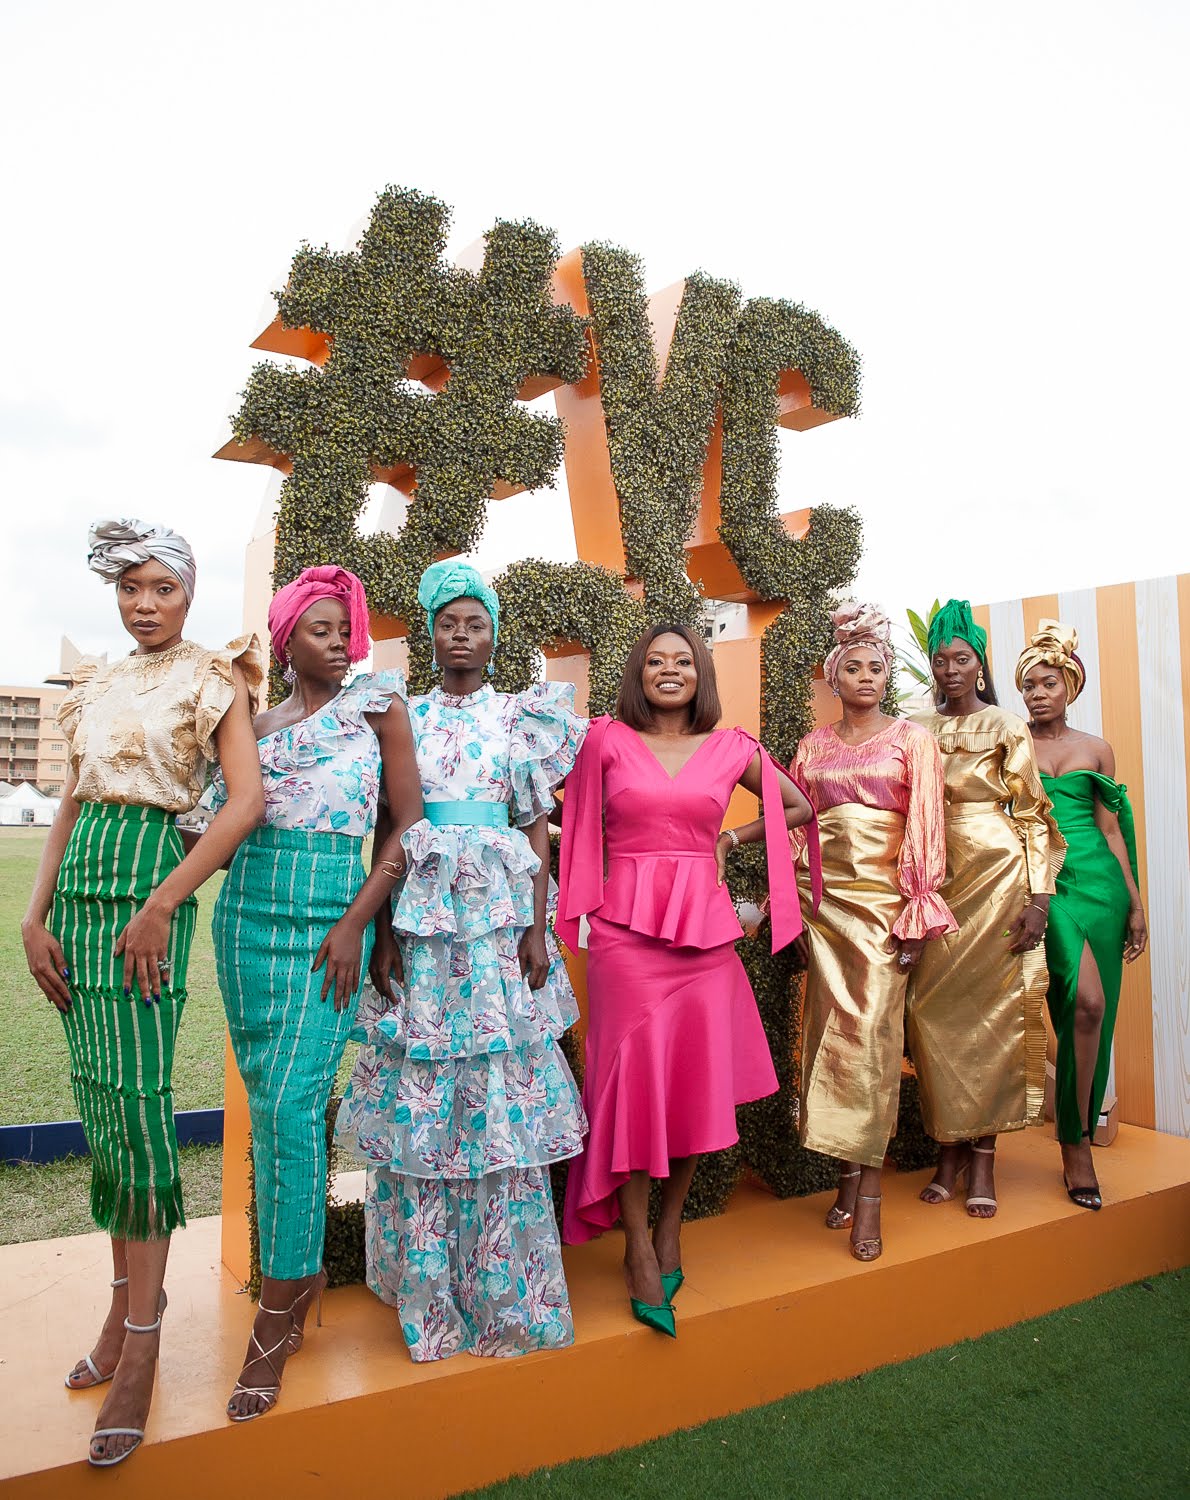 Our Best Looks At The 2019 Veuve Clicquot Polo #Yelloweek Day  3